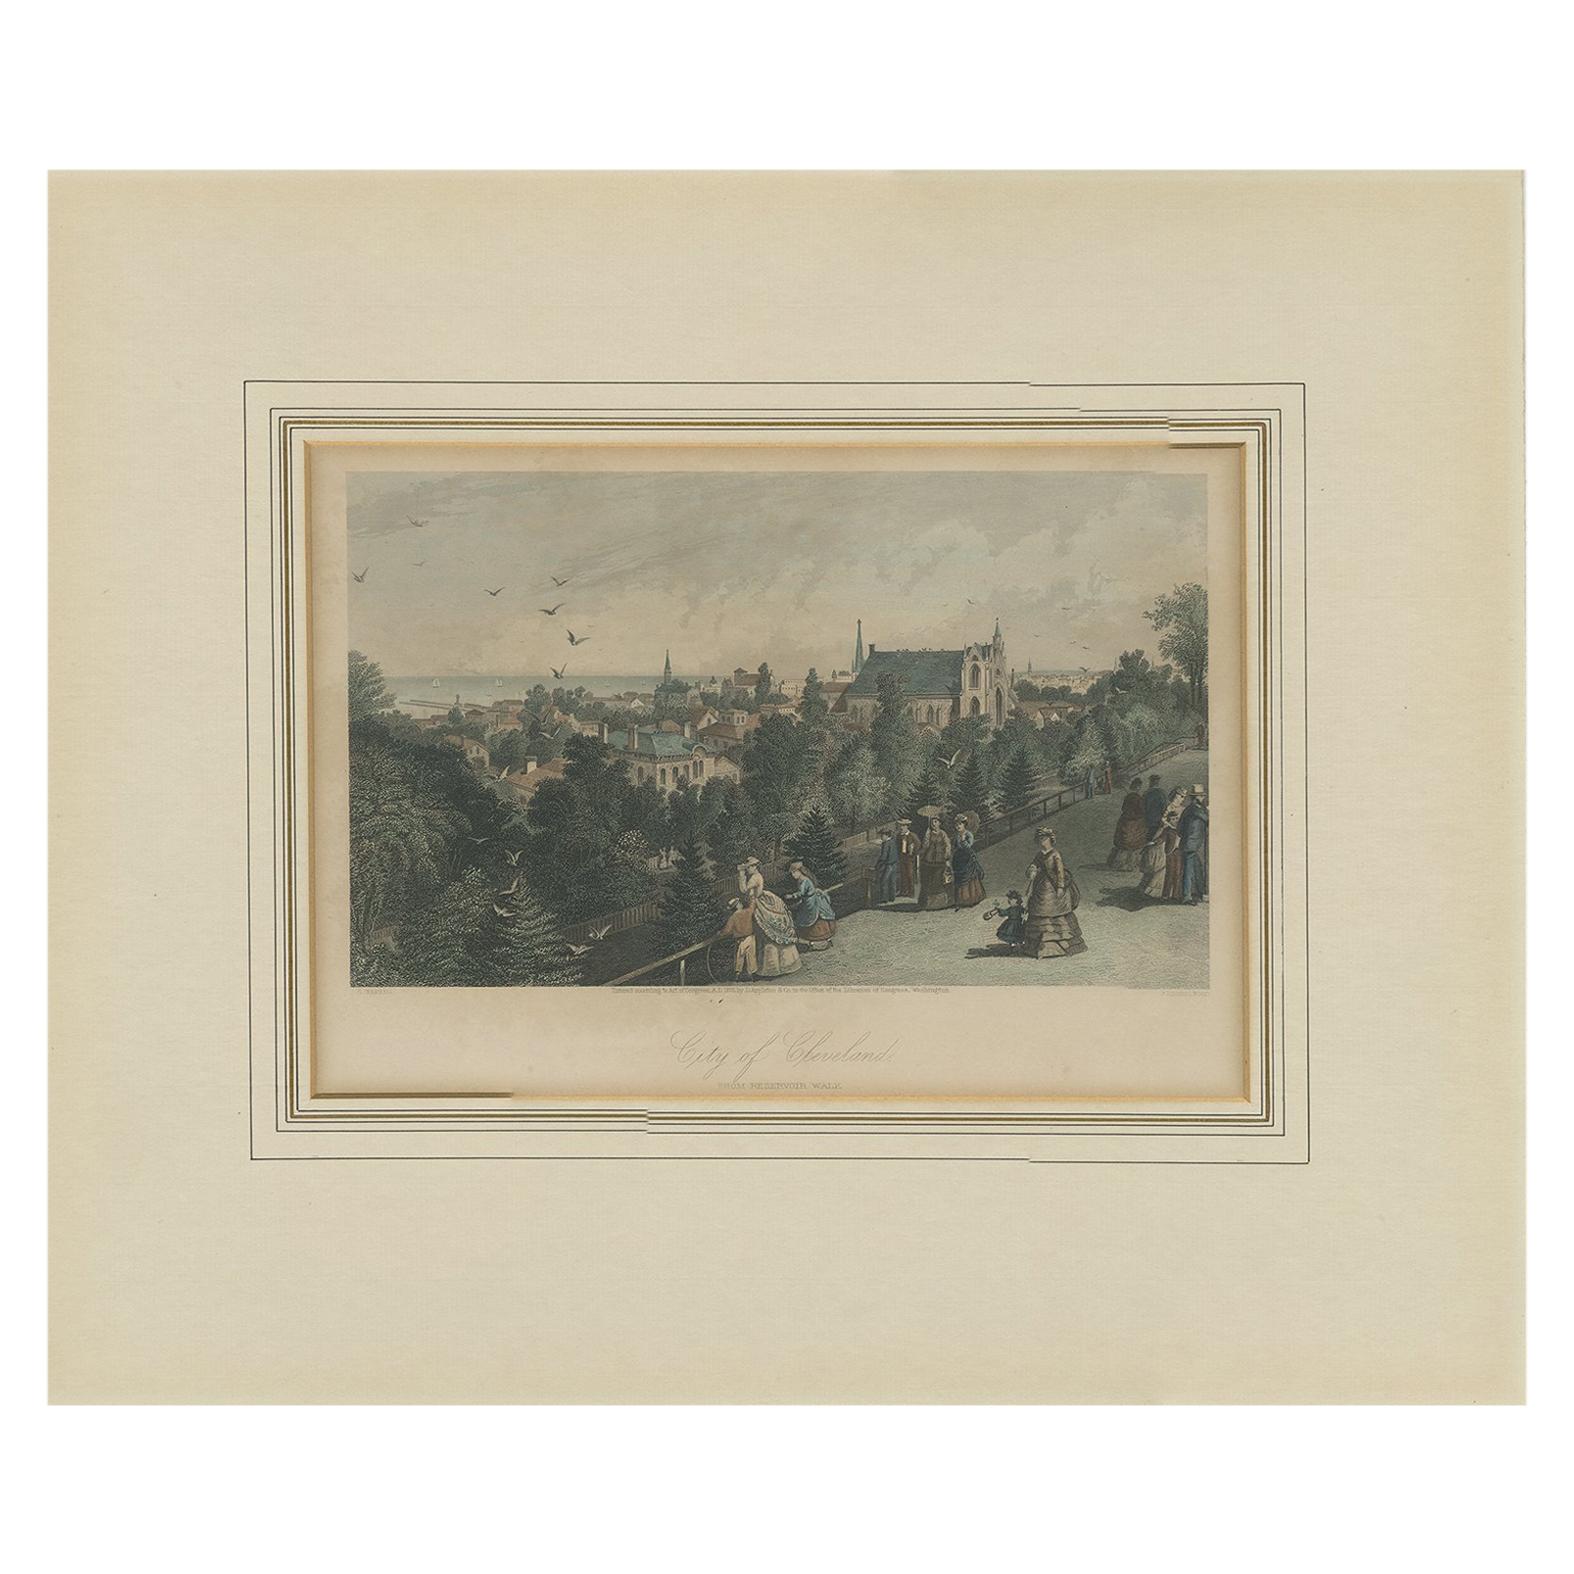 Antique Print of the City of Cleveland by Appleton, 1872